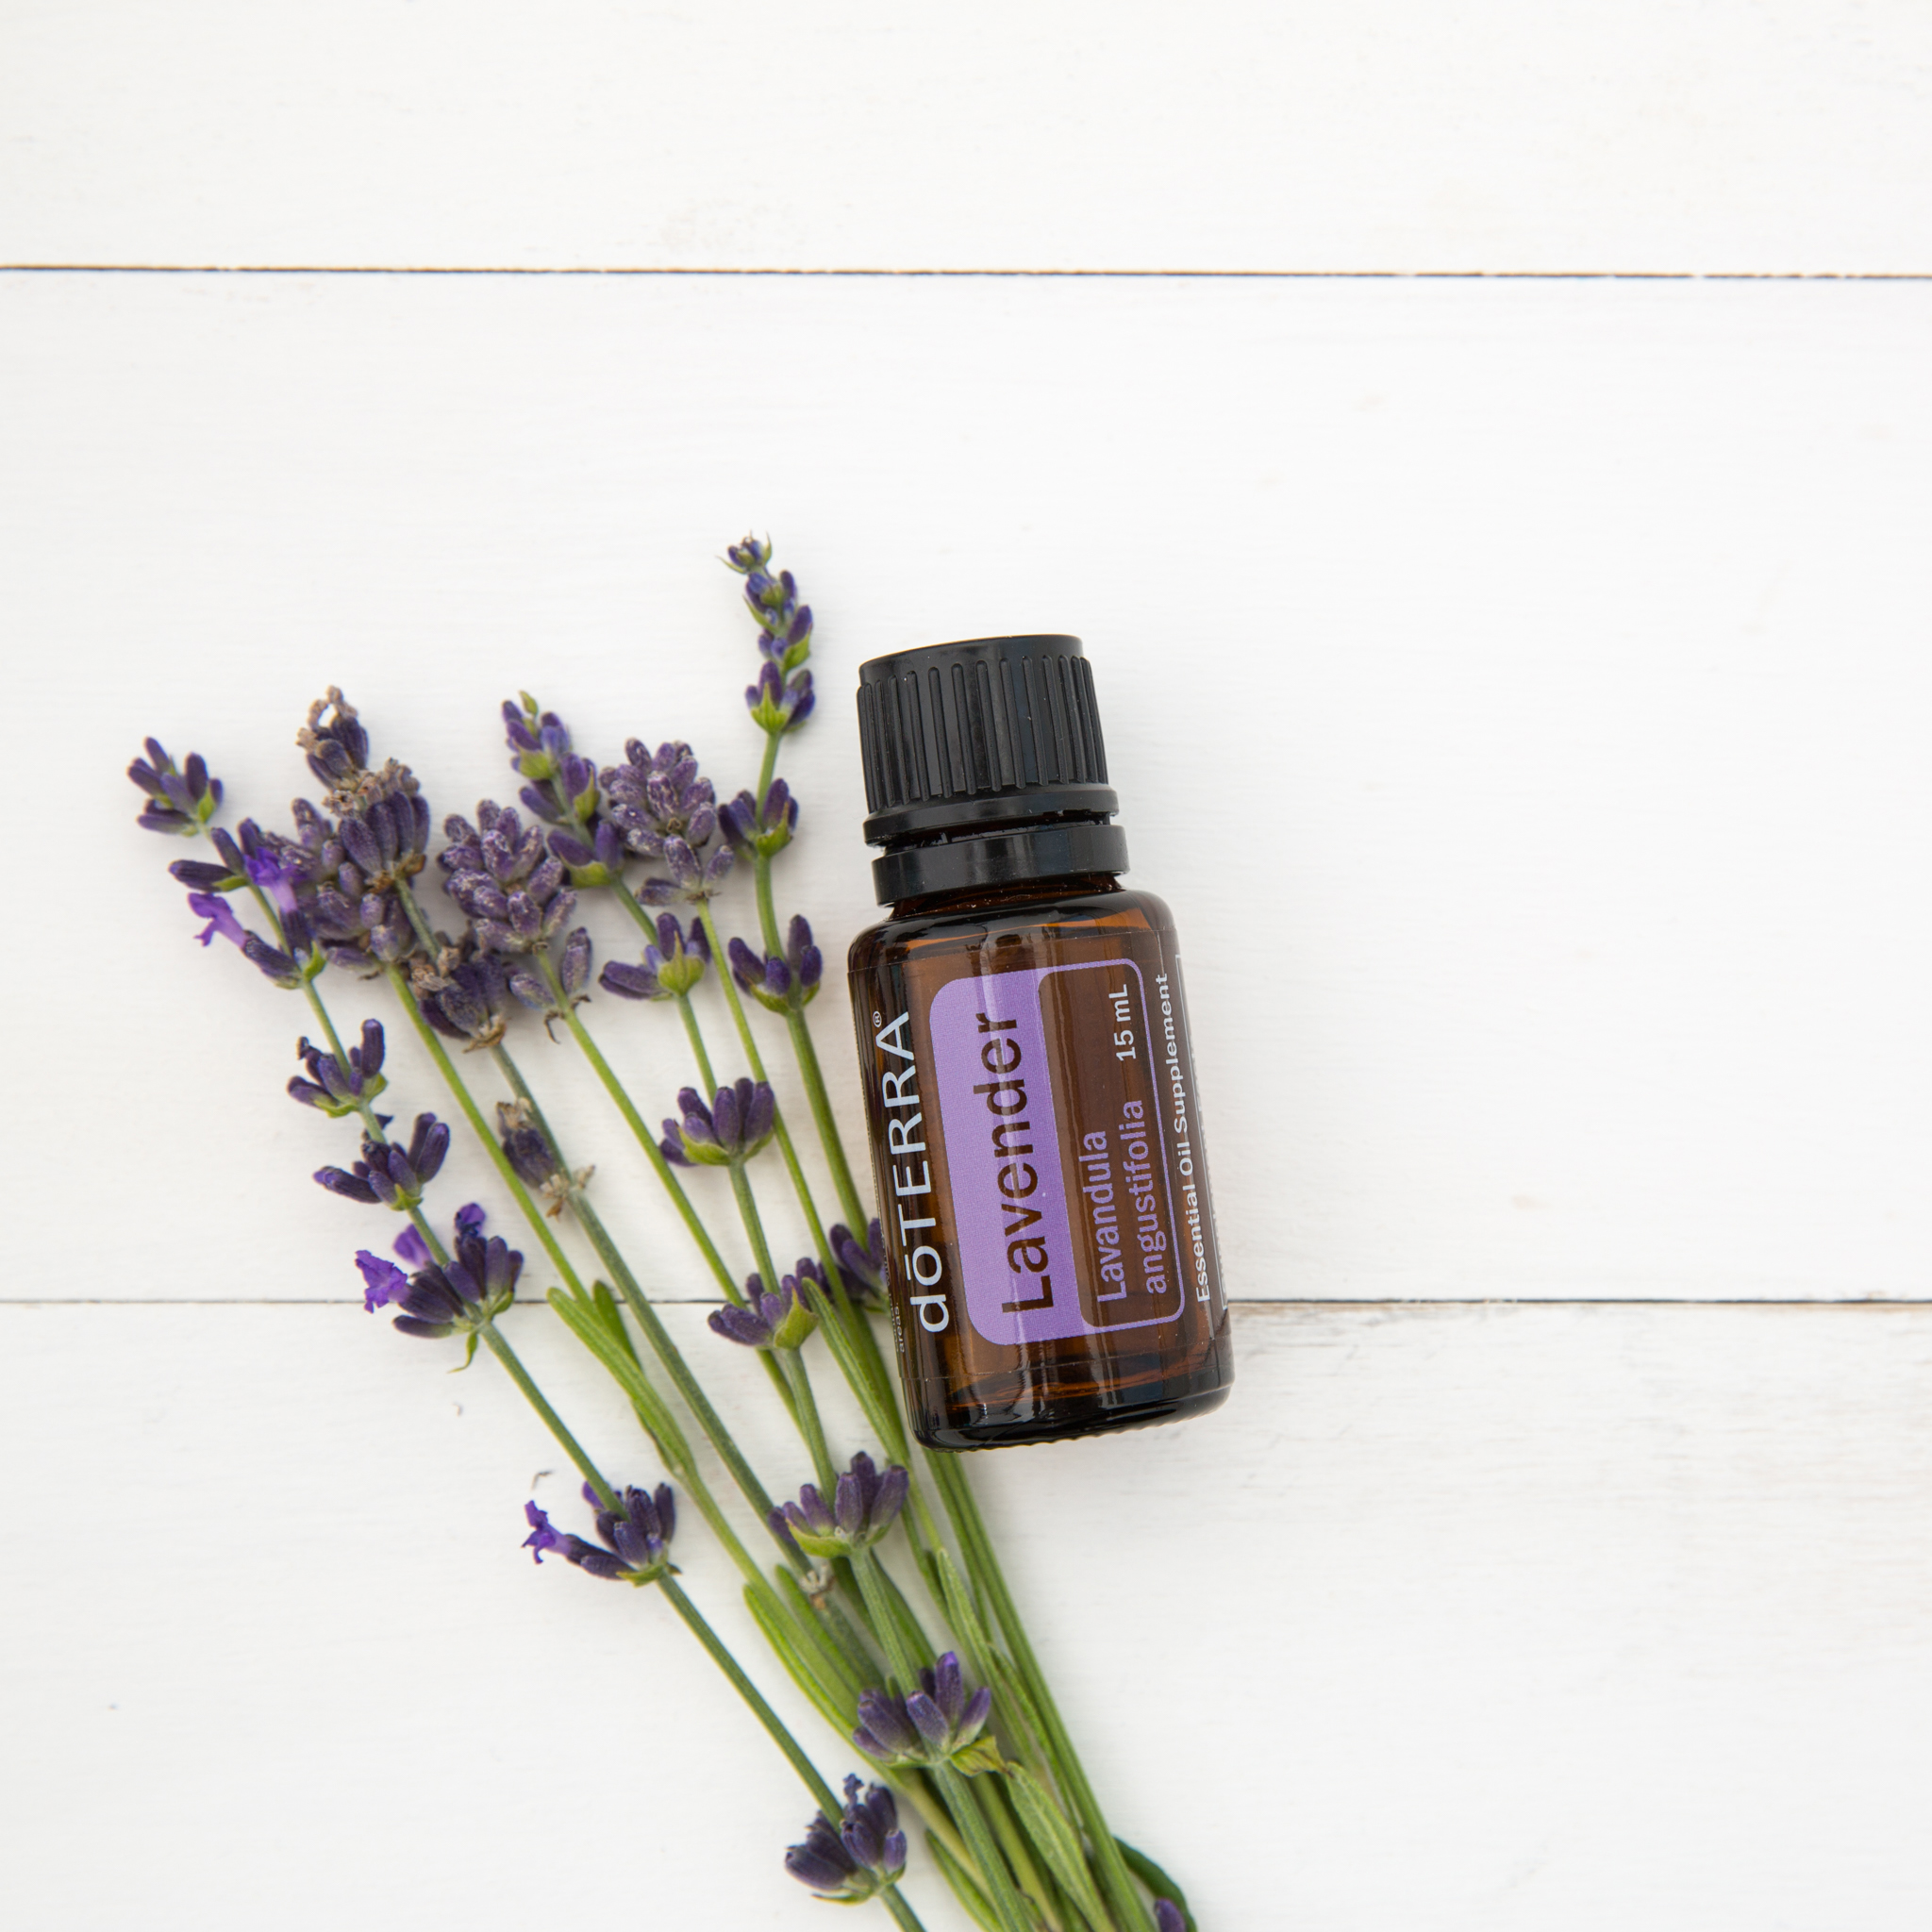 Five Ways to Use doTERRA Essential Oils to Make Spring Your Favorite Season  - Apr 21, 2020